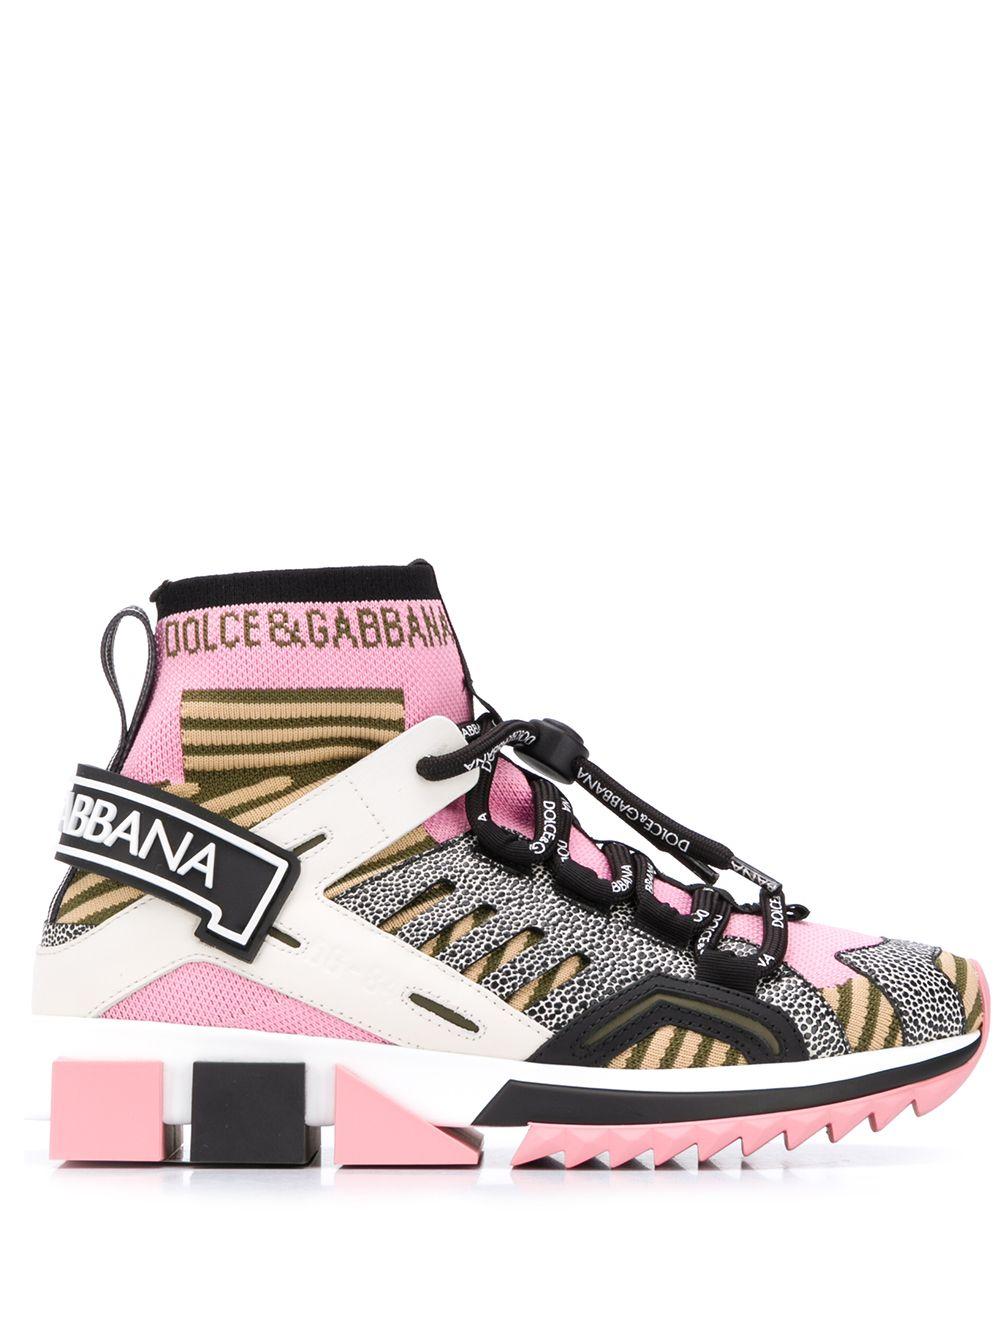 Dolce & Gabbana Sorrento High-top Sneakers in Pink | Lyst